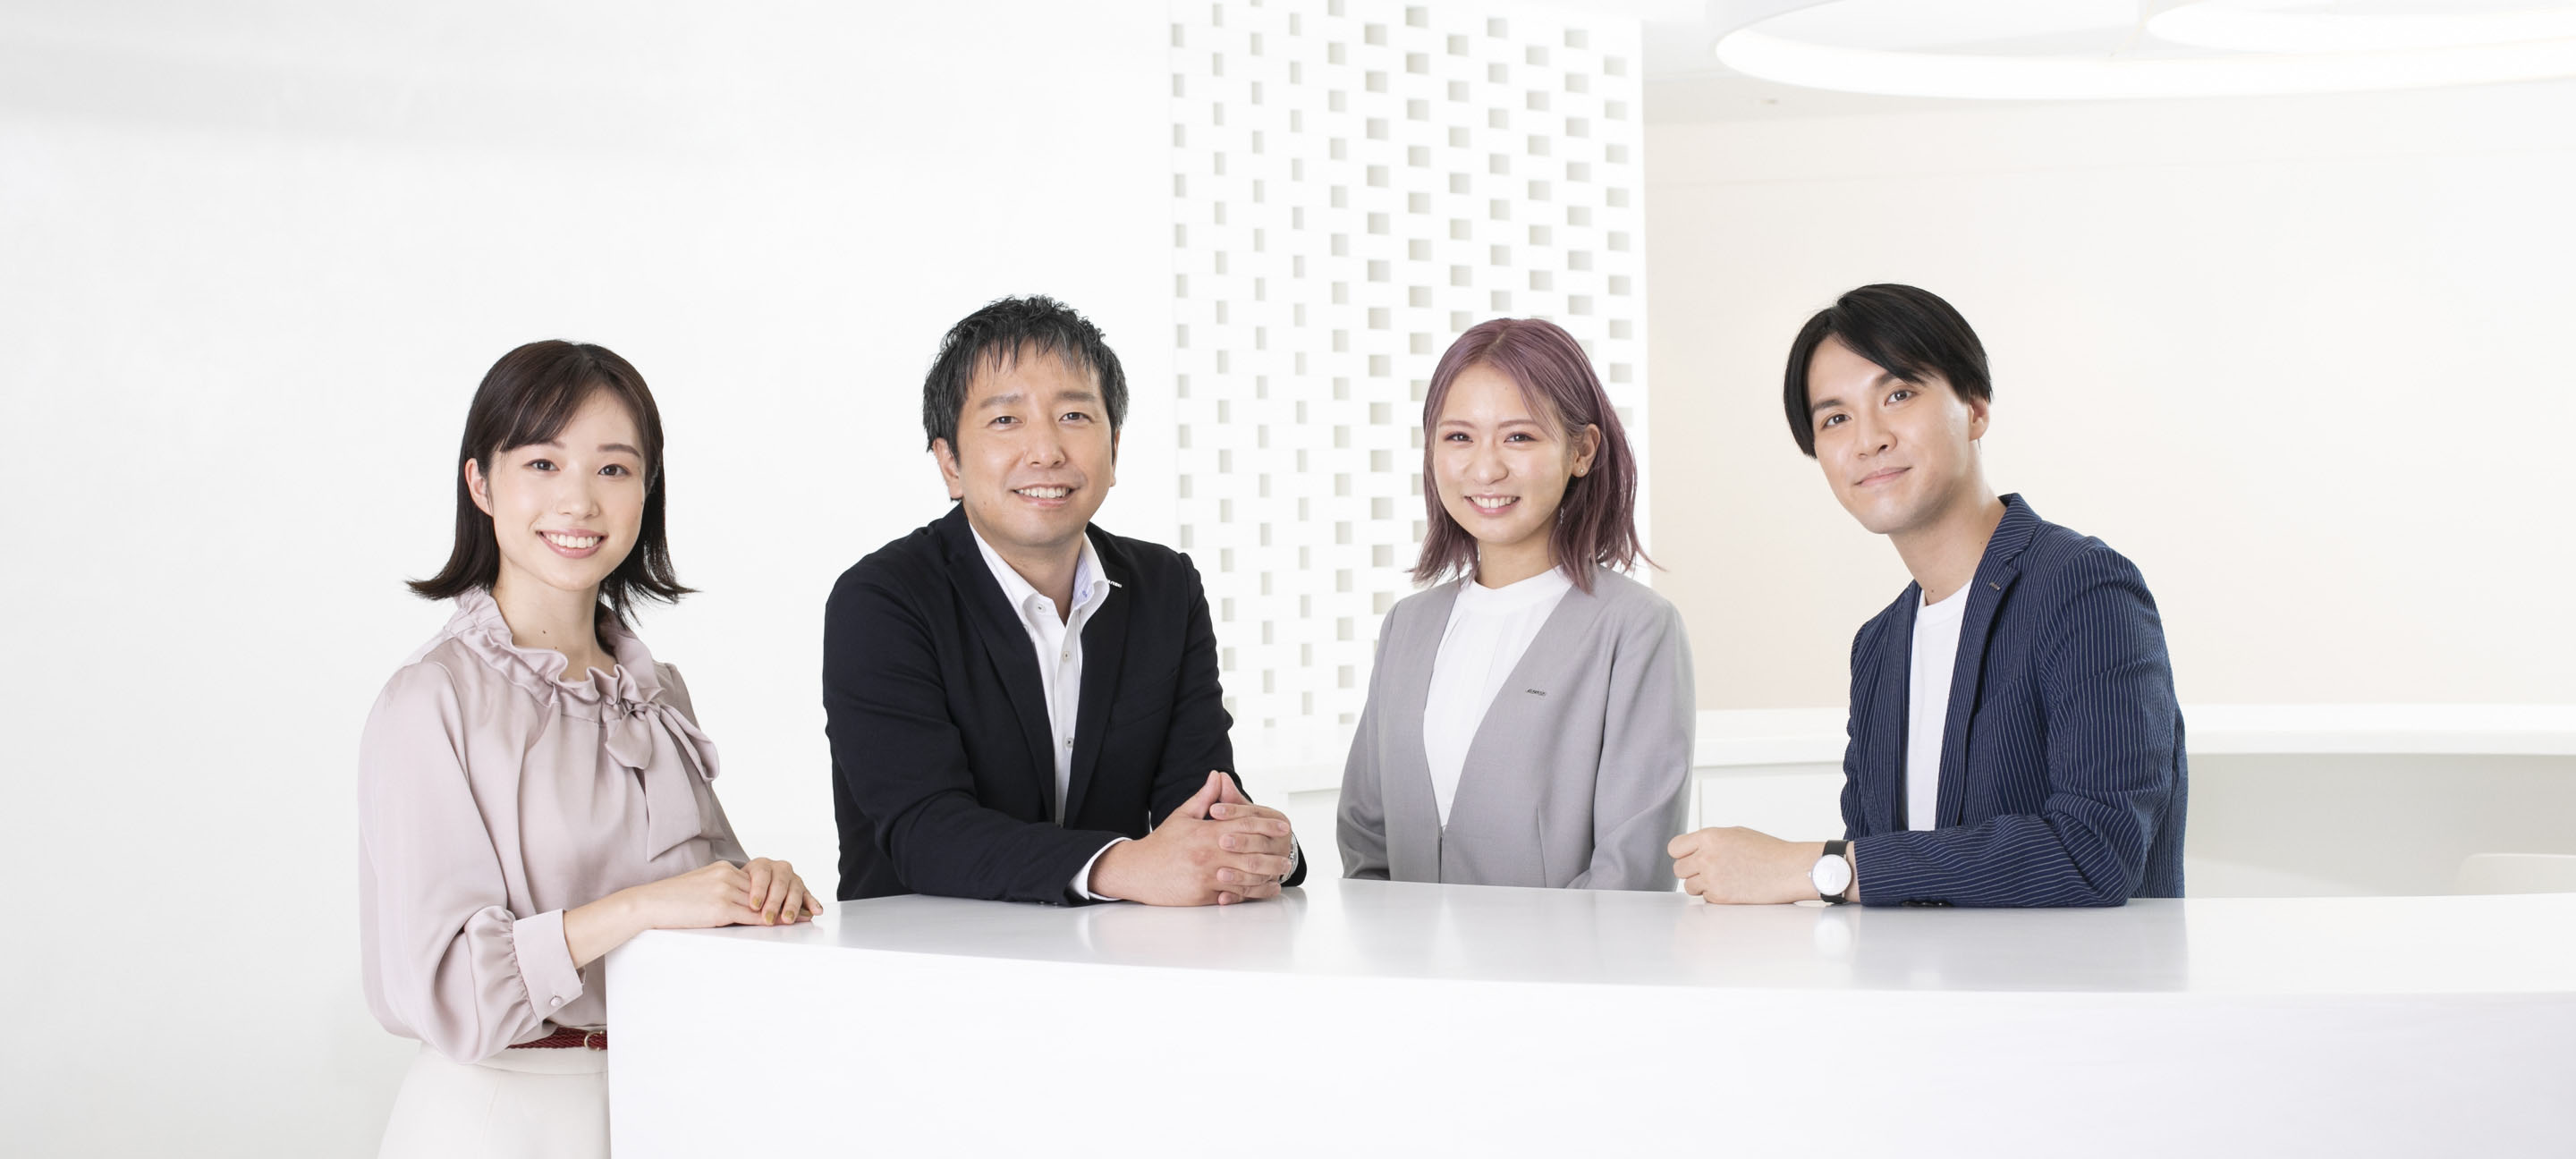 Vision for the 150 Years to Come by the staff members who joined Shiseido in 2022, the 150-year anniversary of foundation